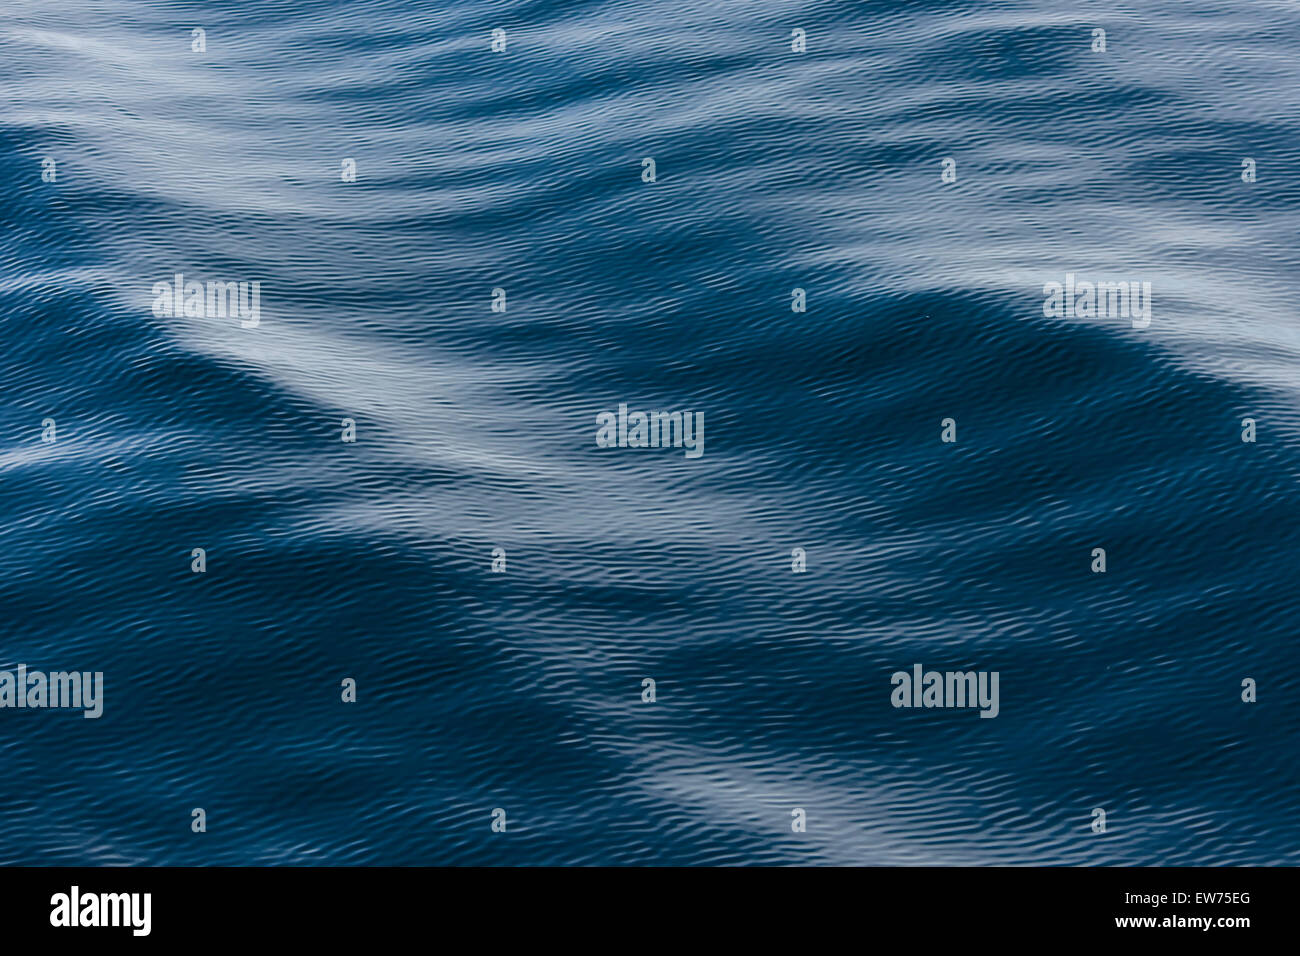 Ripples, surface of the sea, Denmark Strait, Greenland Stock Photo